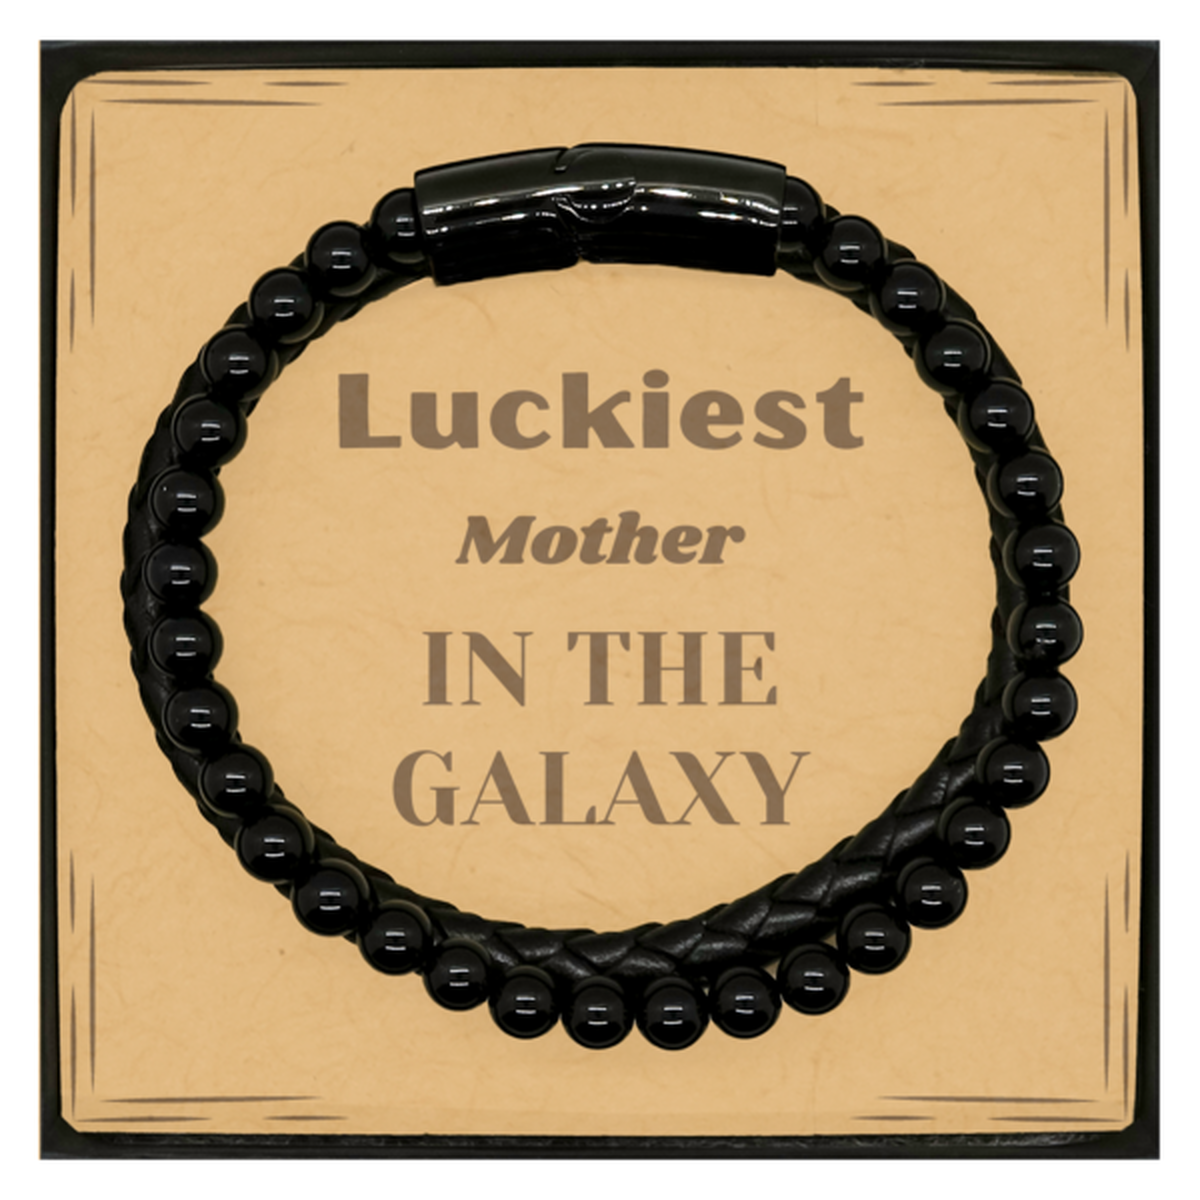 Luckiest Mother in the Galaxy, To My Mother Message Card Gifts, Christmas Mother Stone Leather Bracelets Gifts, X-mas Birthday Unique Gifts For Mother Men Women